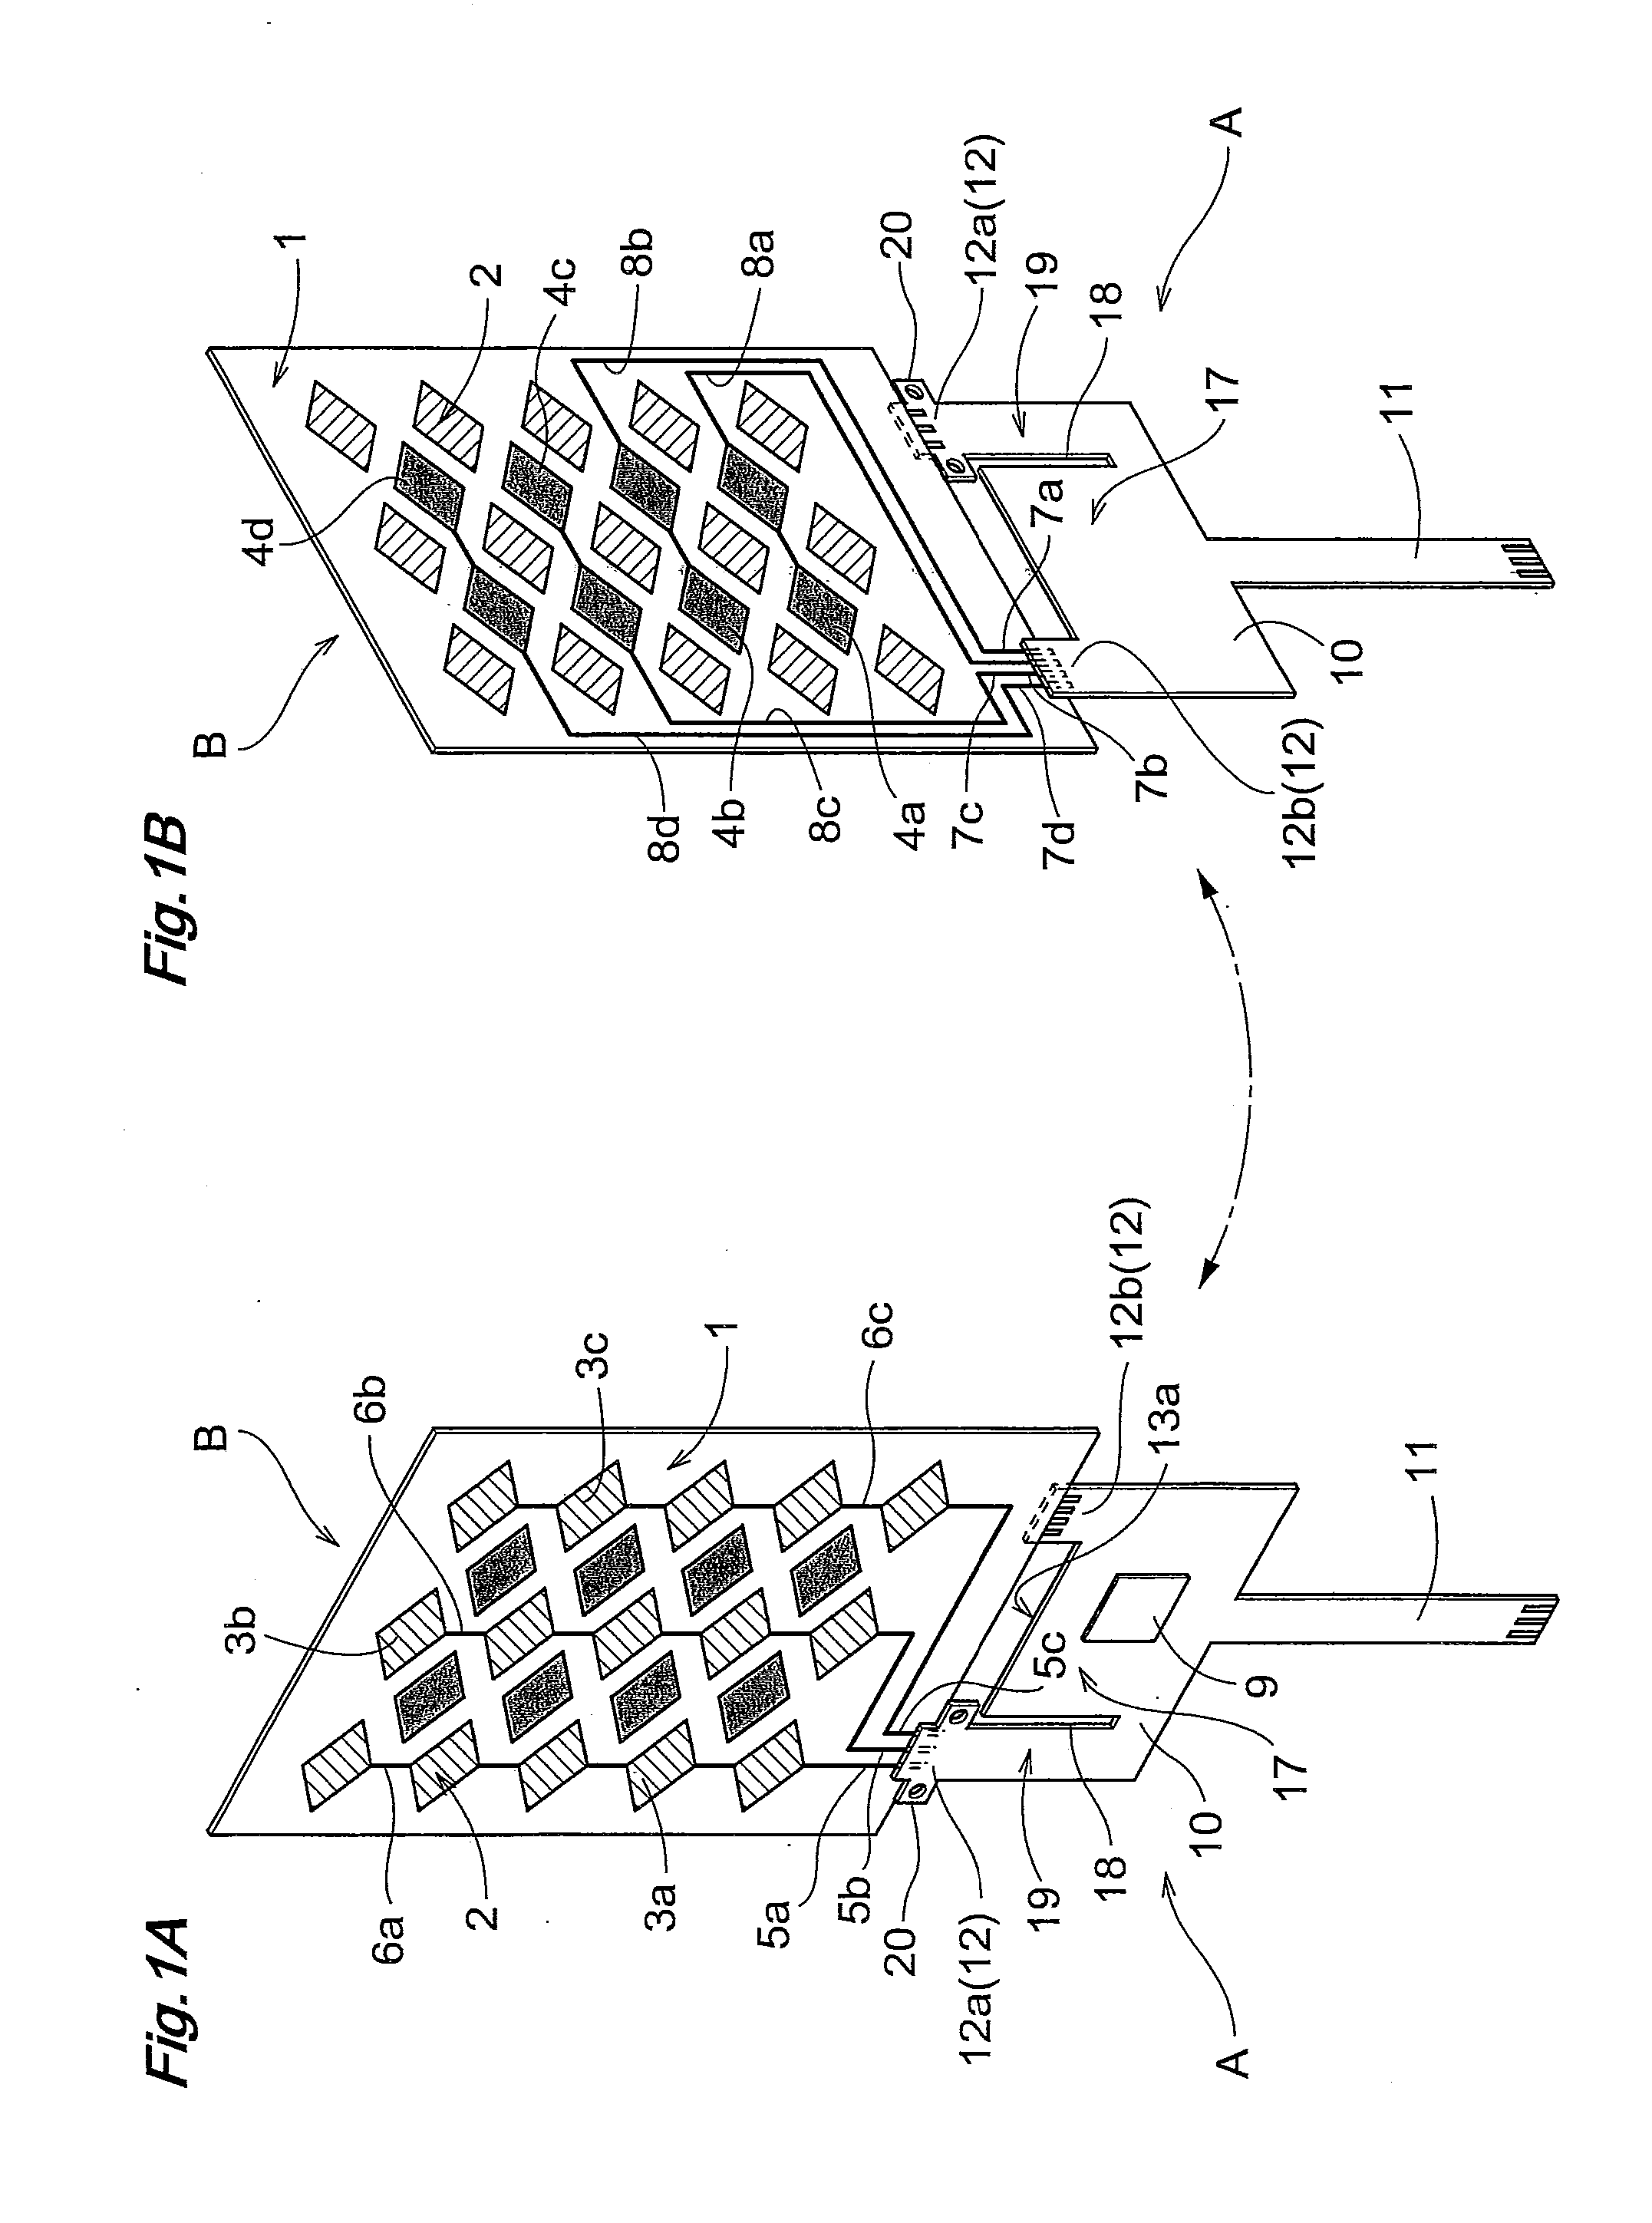 Flexible Wiring Substrate